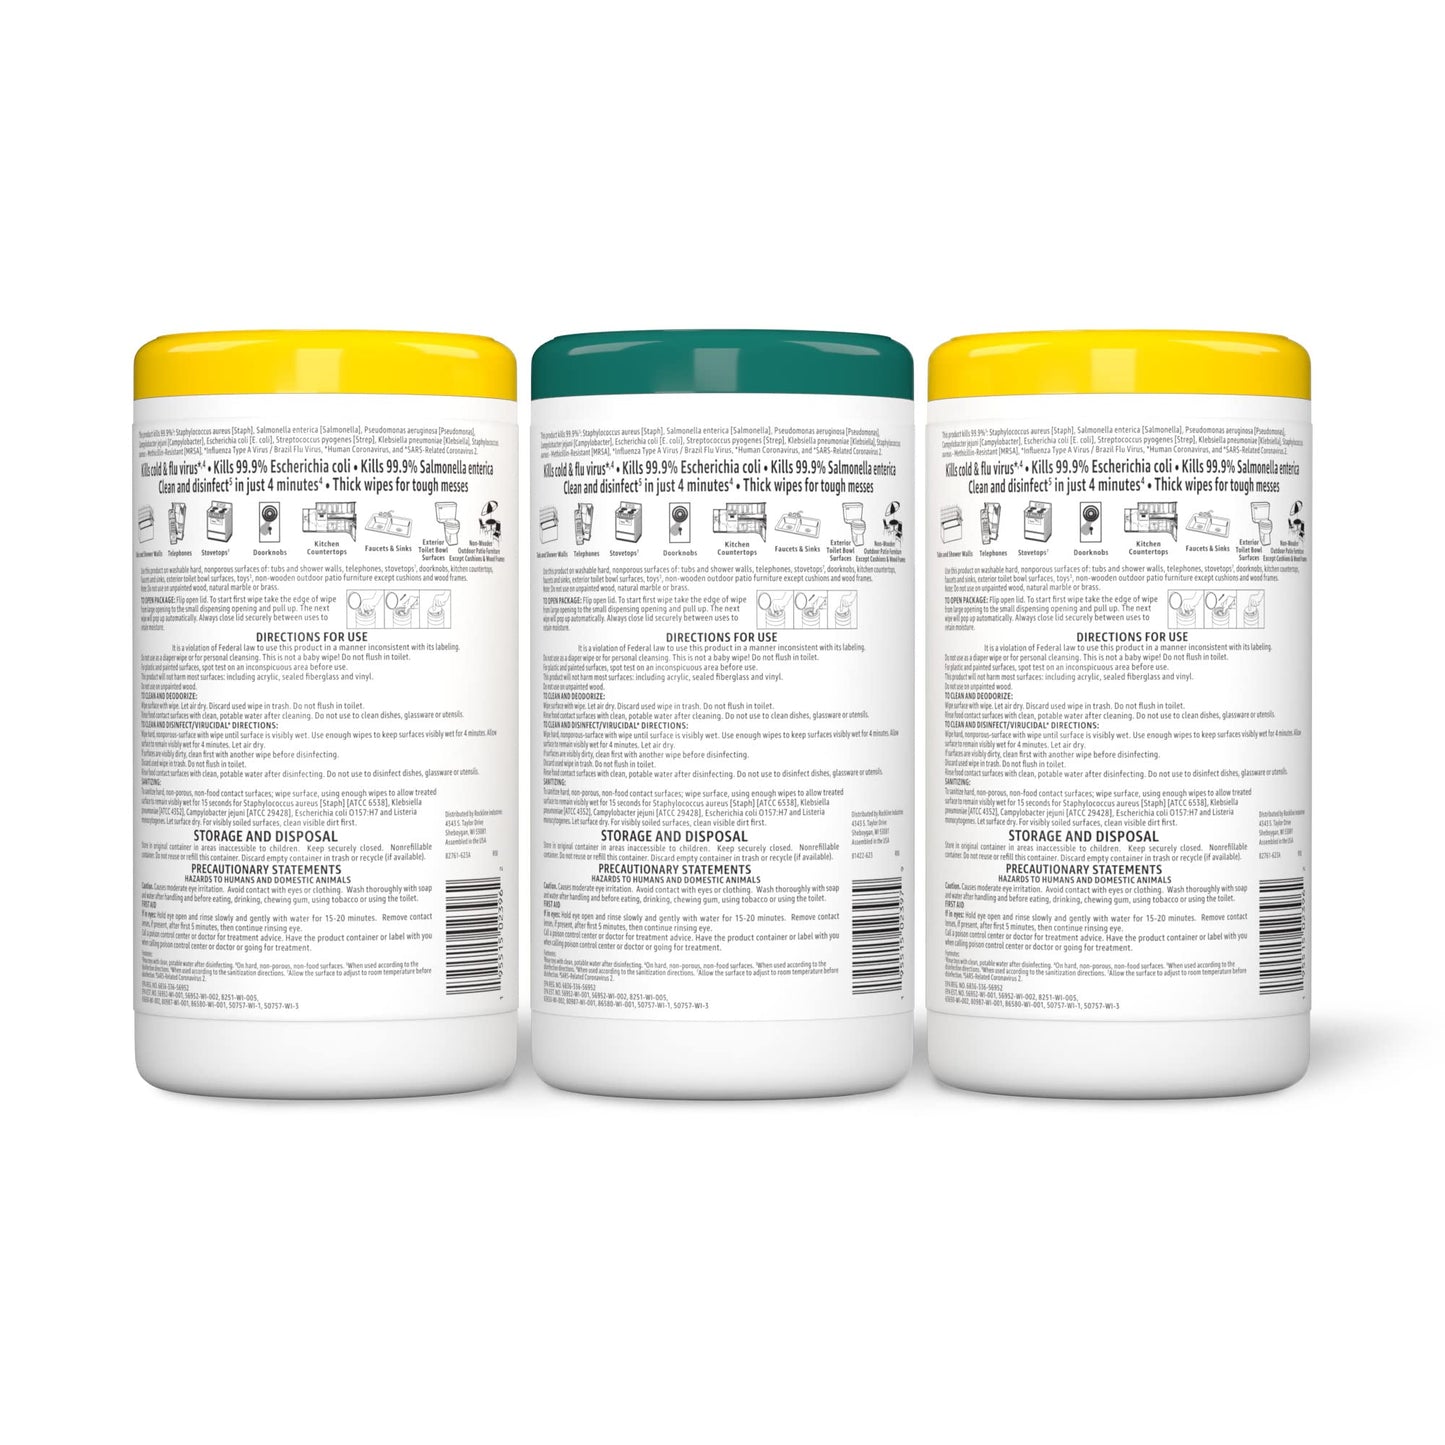 Basics Disinfecting Wipes, Lemon & Fresh Scent, Sanitizes/Cleans/Disinfects/Deodorizes, 340 Count (4 Packs of 85)